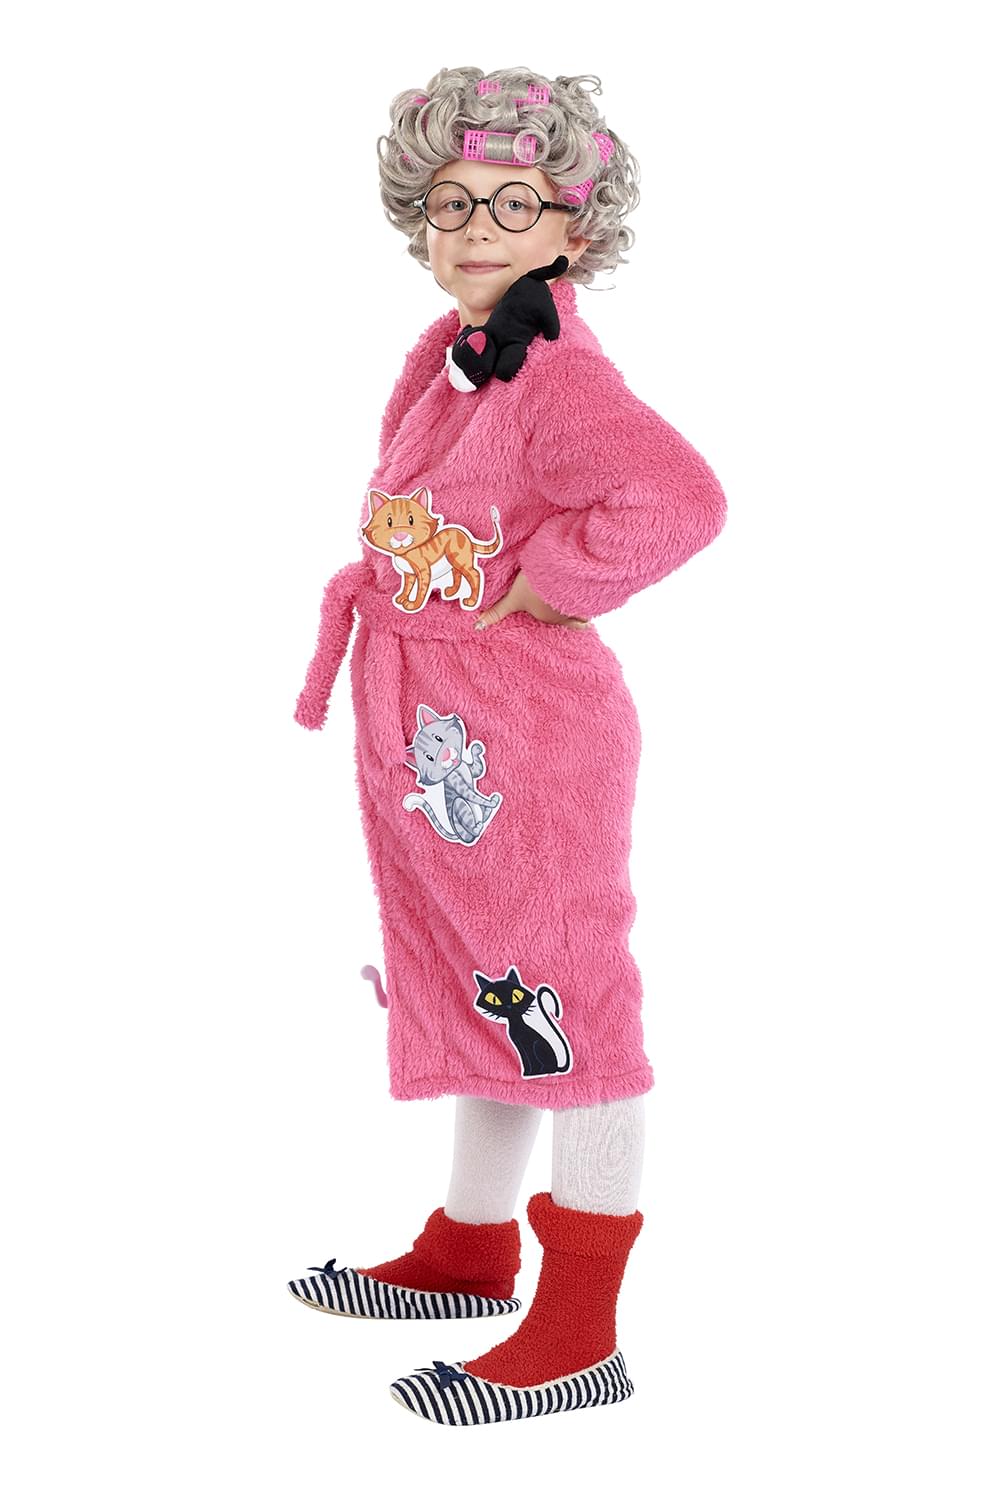 Crazy Cat Lady Kids Costume | Robe & Wig Set | One Size Fits Up to Size 10